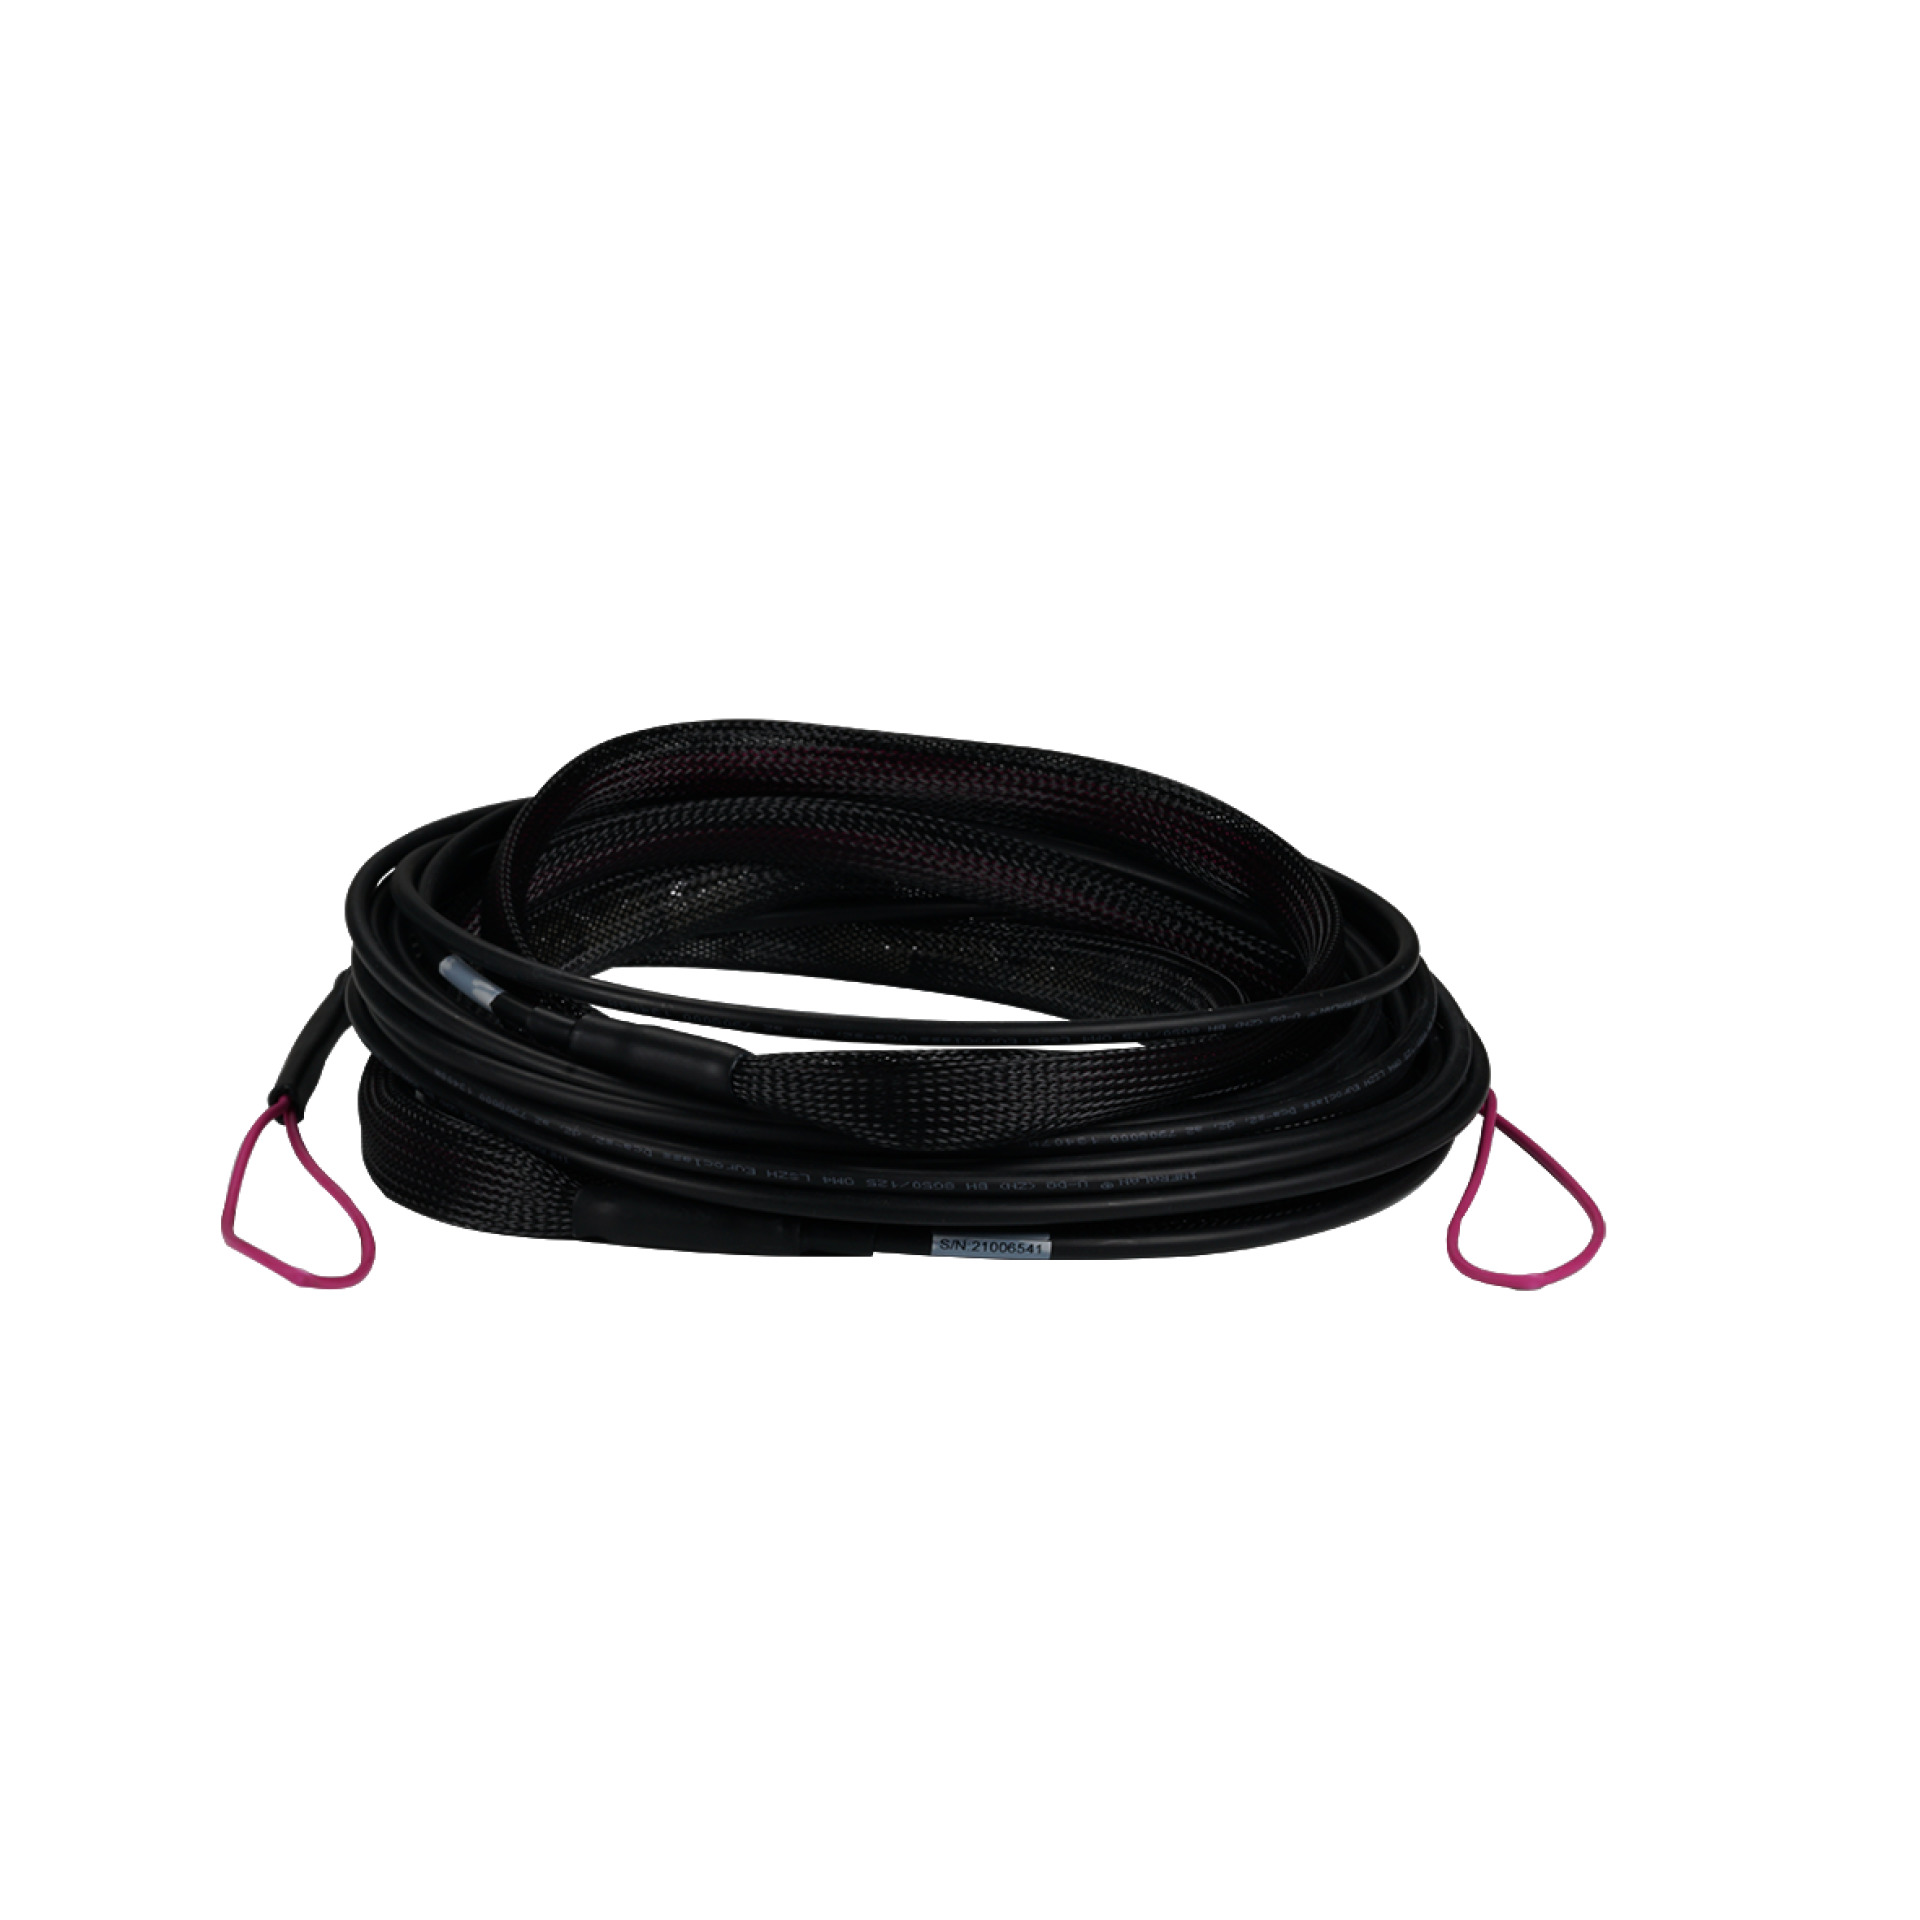 Trunk cable U-DQ(ZN)BH 4G 50/125, SC/SC OM4 170m